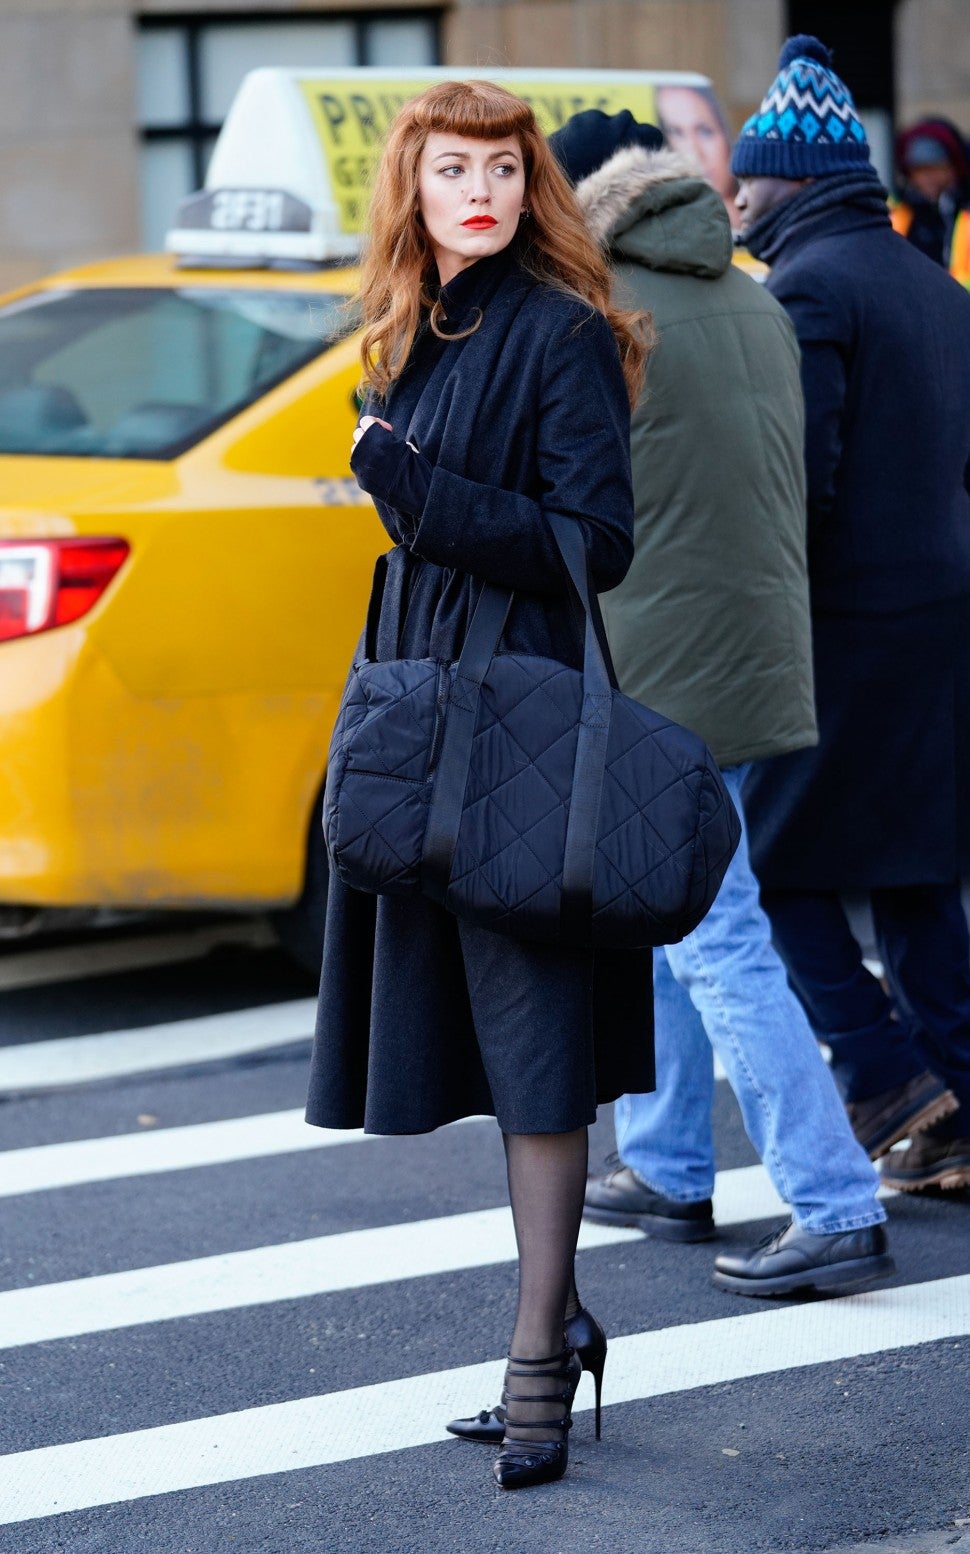 Blake Lively on set in NYC